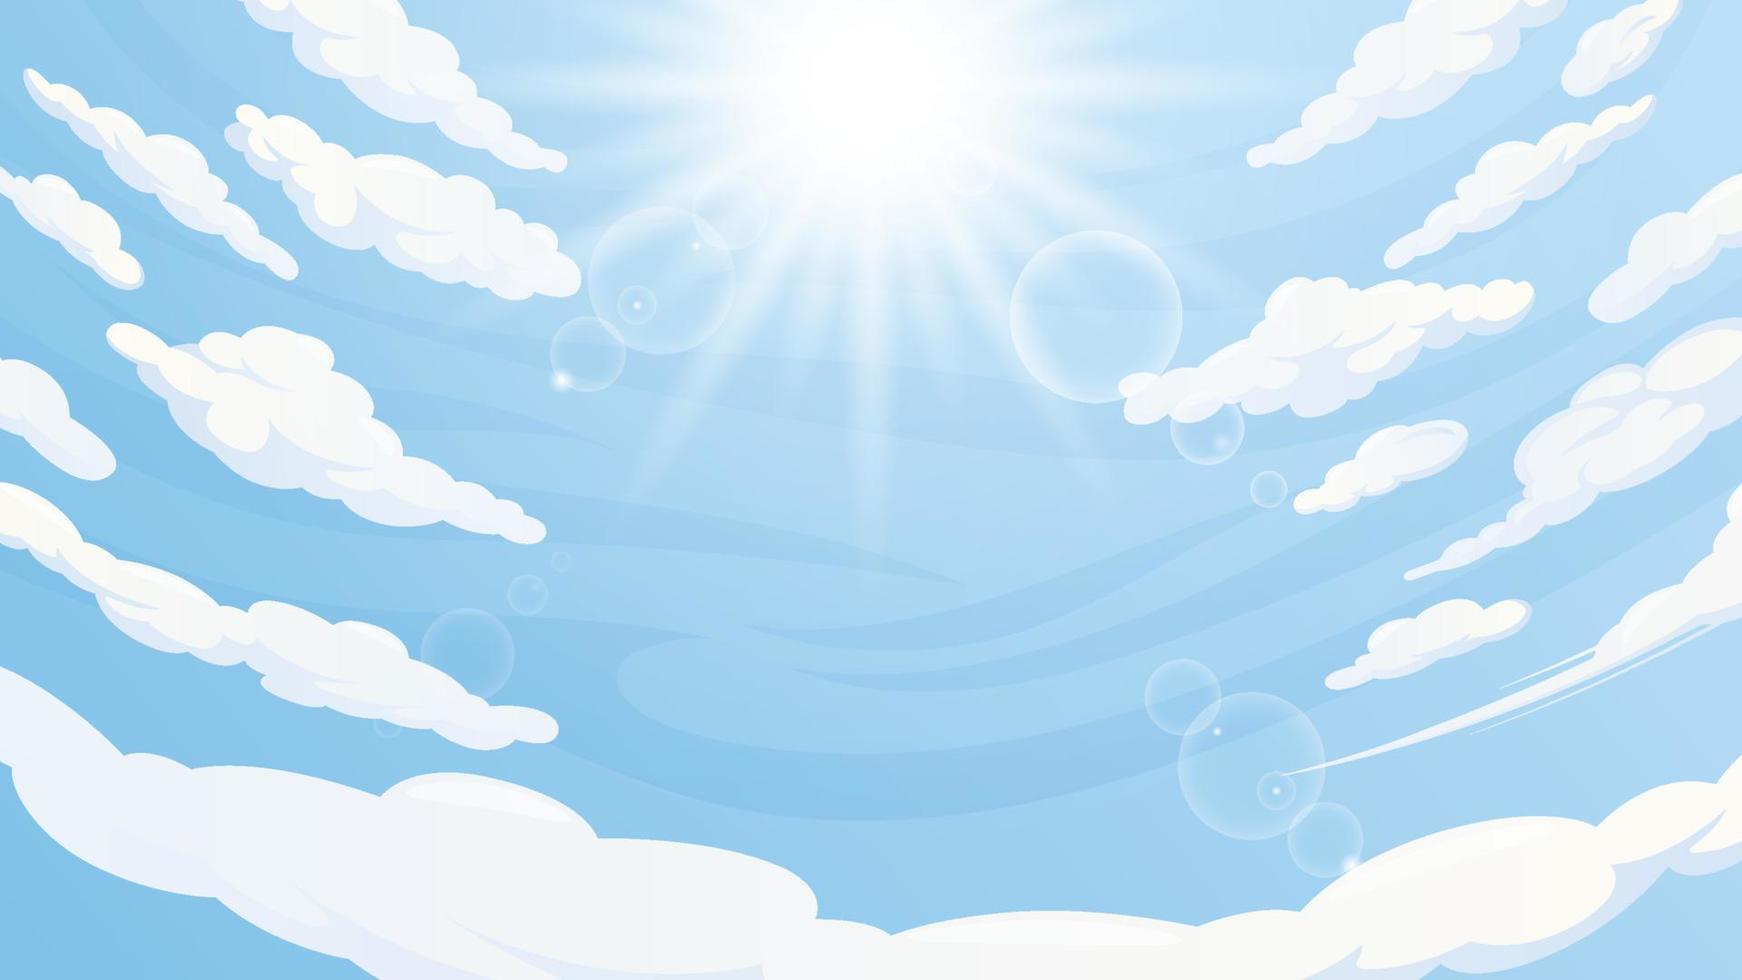 Blue Sky Background with Clouds vector